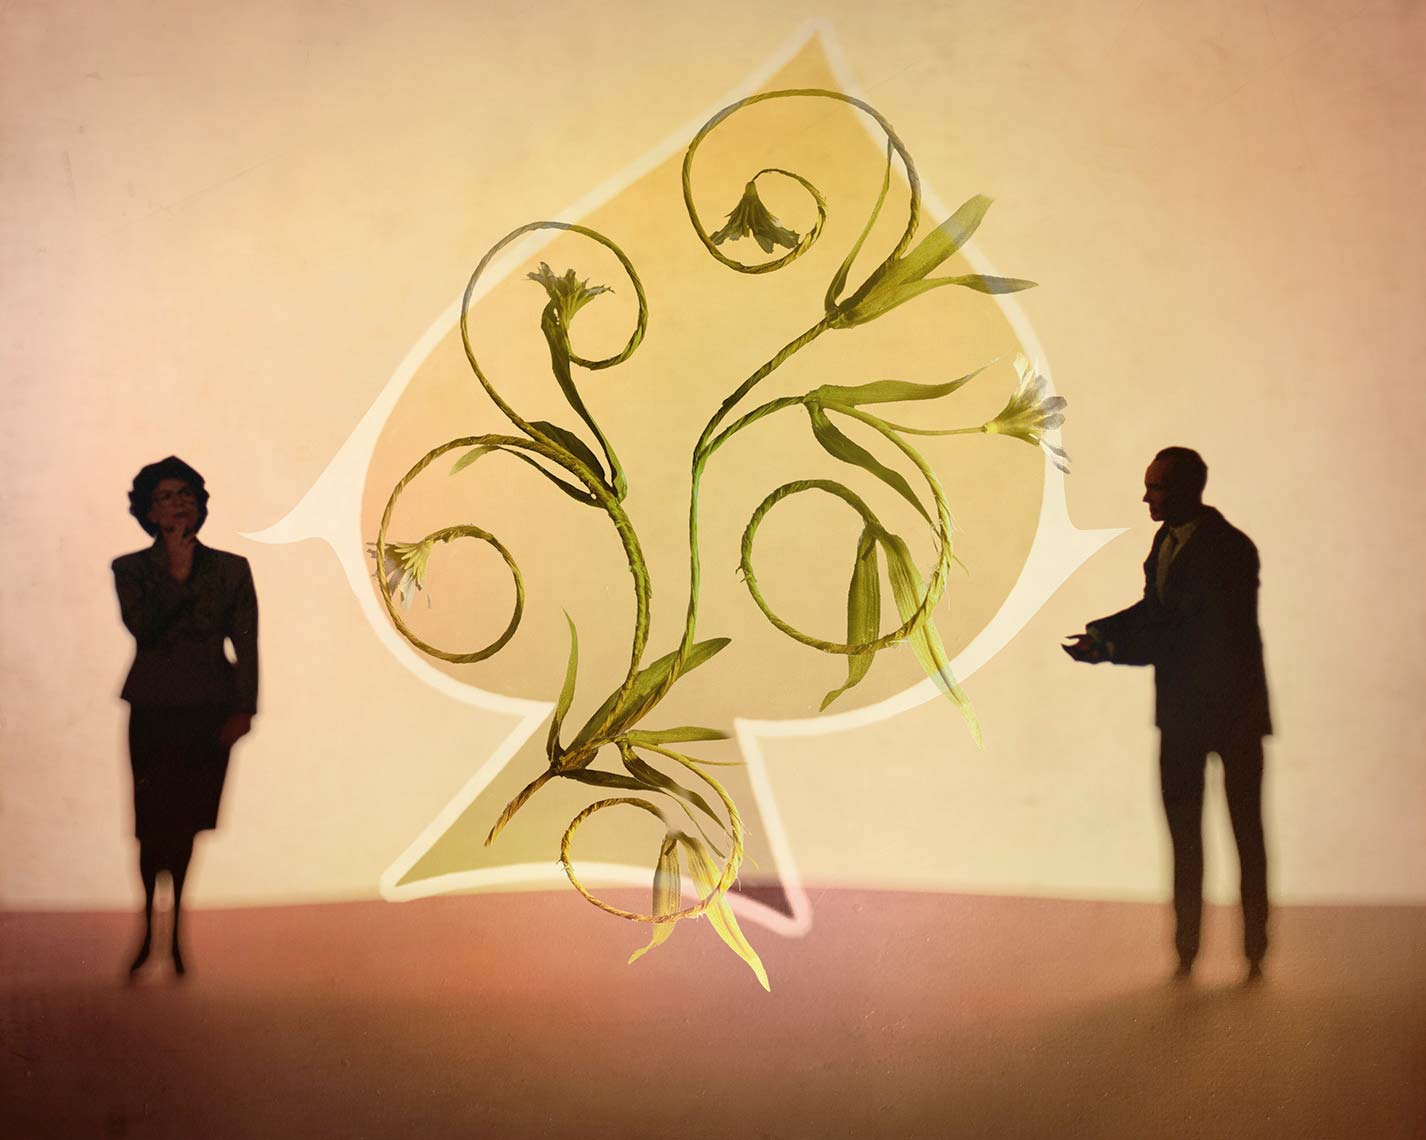 Silhouettes of a male and female business figures, on either side of a network of curving vines, suggesting communication.